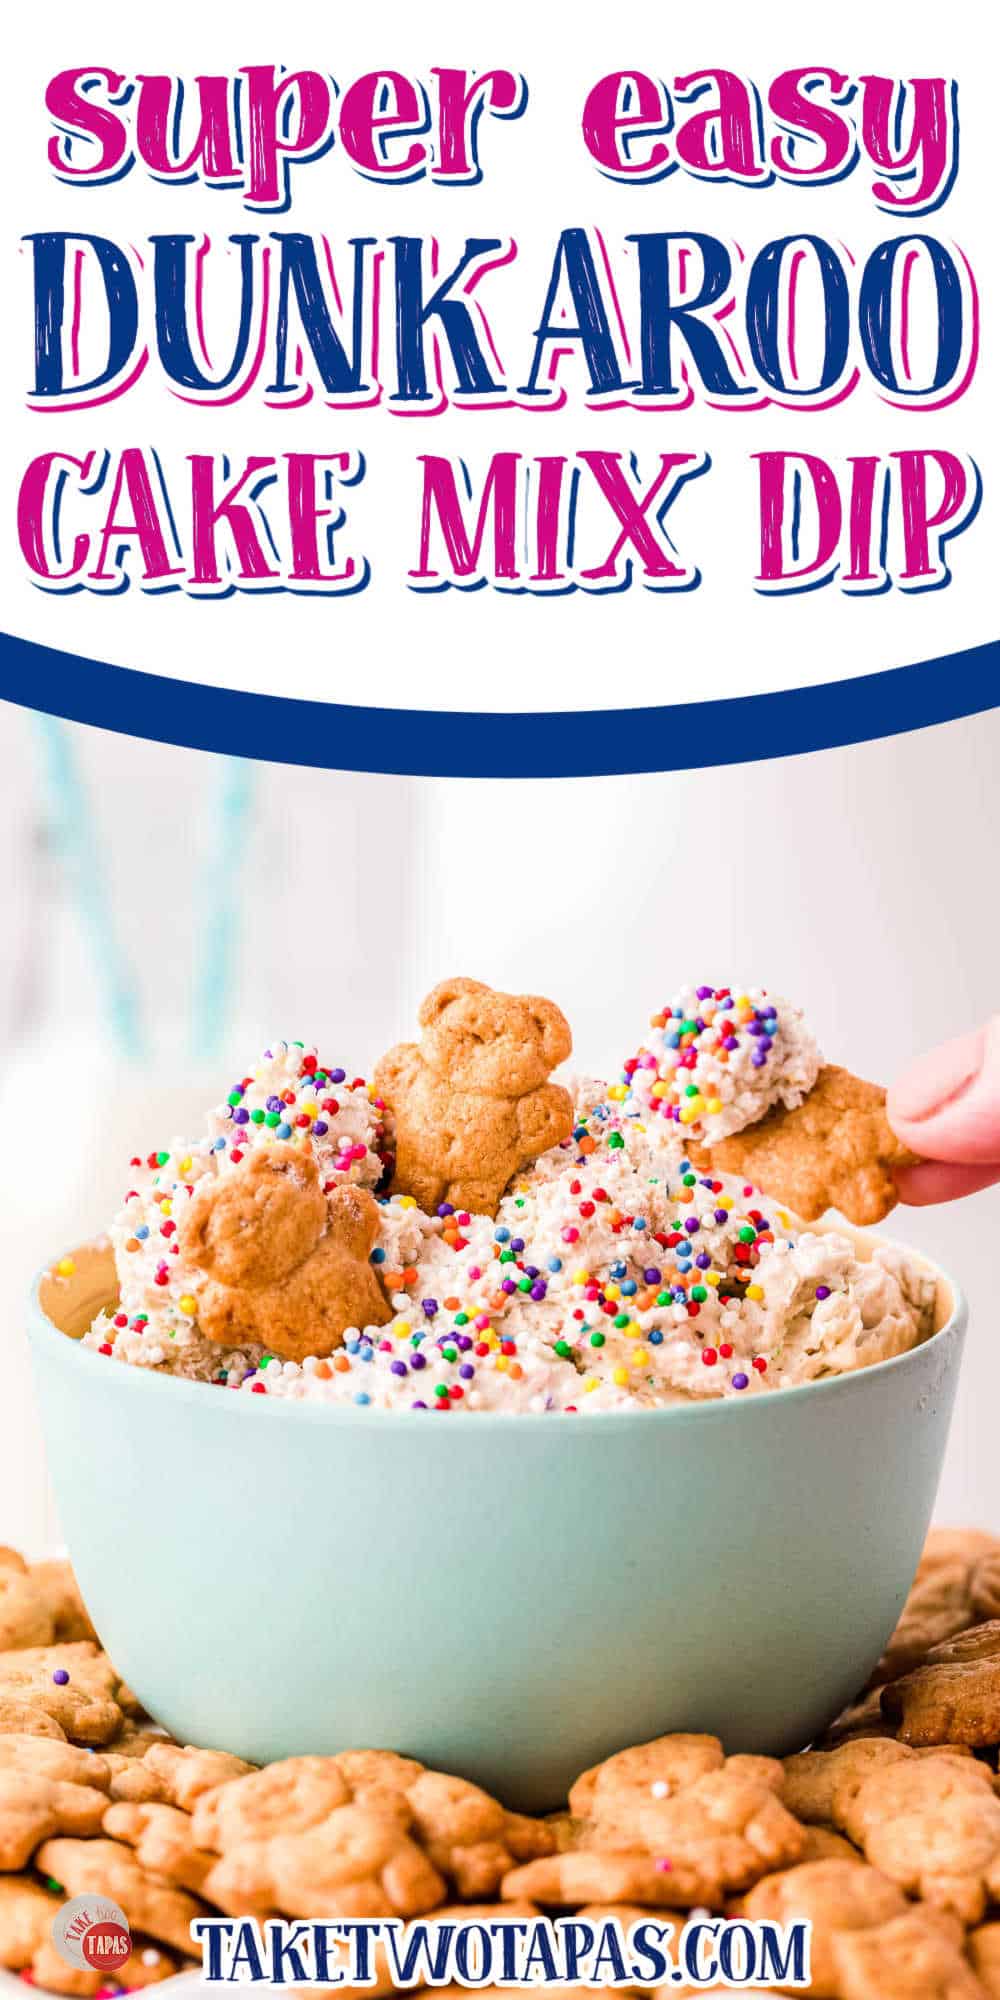 hand scooping funfetti dip with text "super easy dunkaroo cake mix dip"